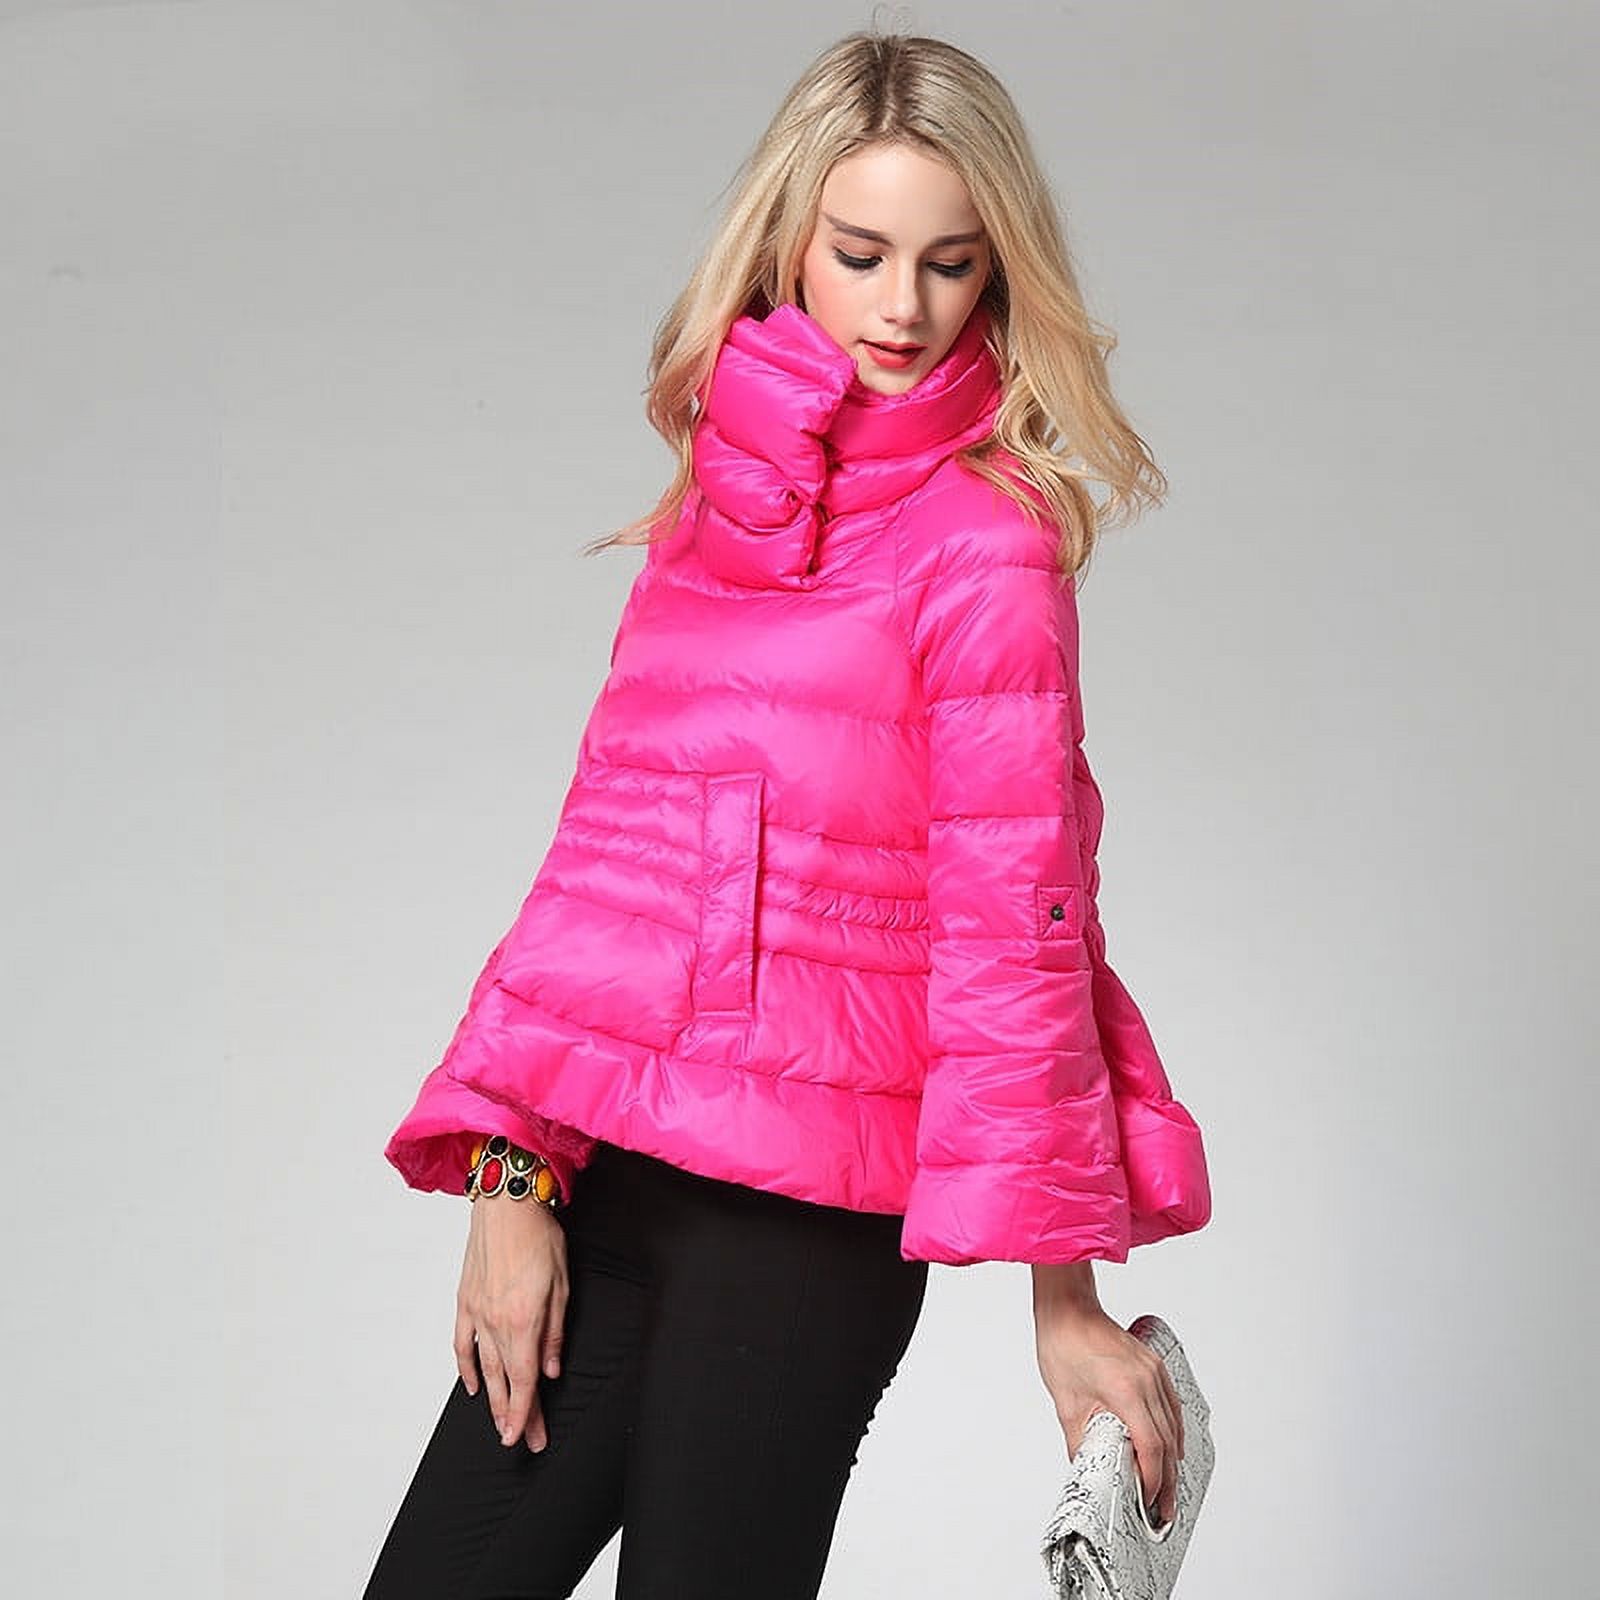 Toyella Down Jacket Women's Winter Fashion White Duck Down A- Line Plus Size Lightweight Thermal Turtleneck Down Jacket One Piece Dropshipping Rose Red XXL - image 1 of 7